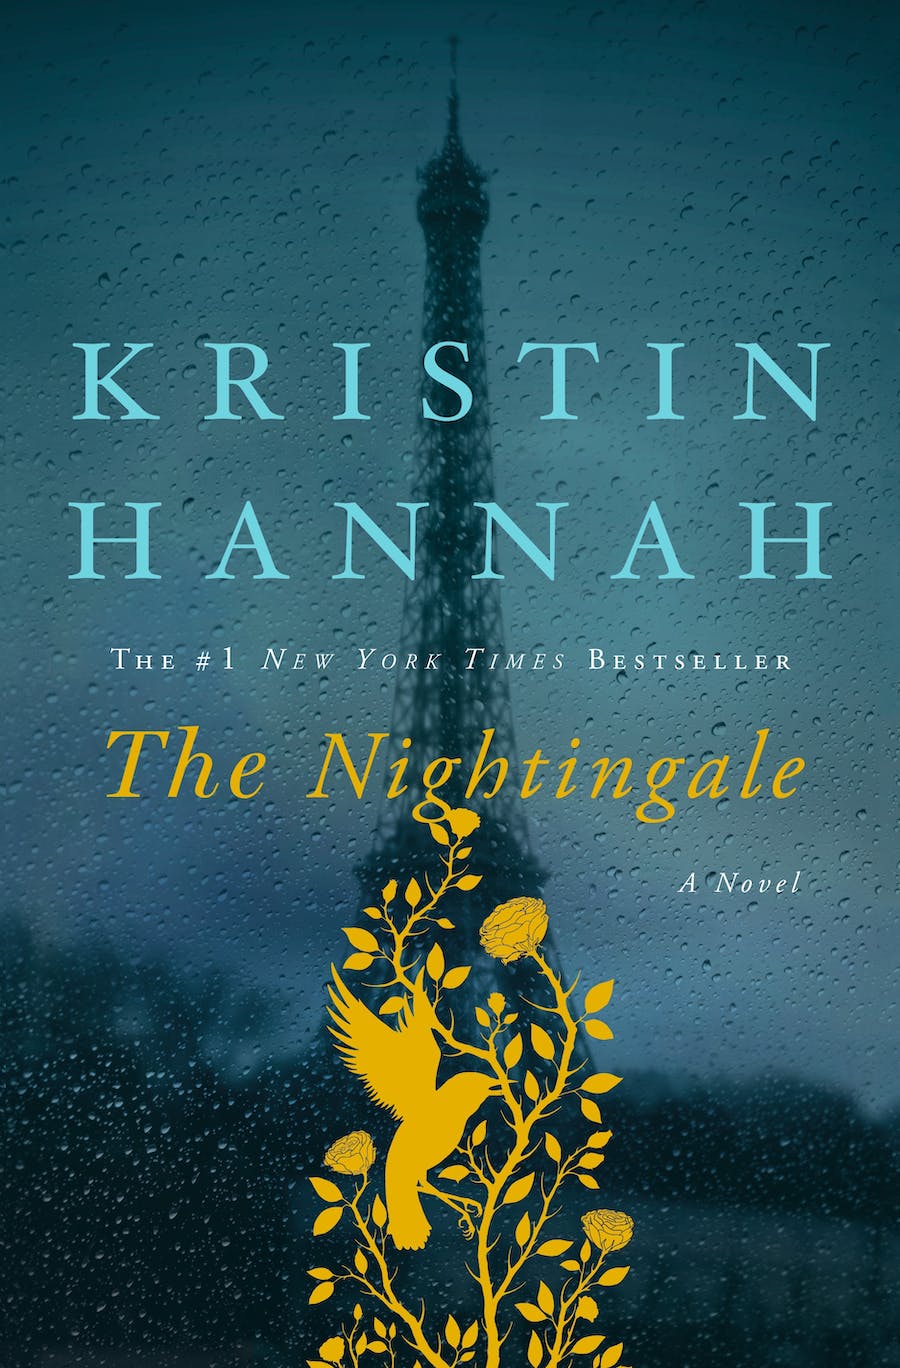 The Nightingale by Kristin Hannah - Must-Read Books For Colleen Hoover’s Readers